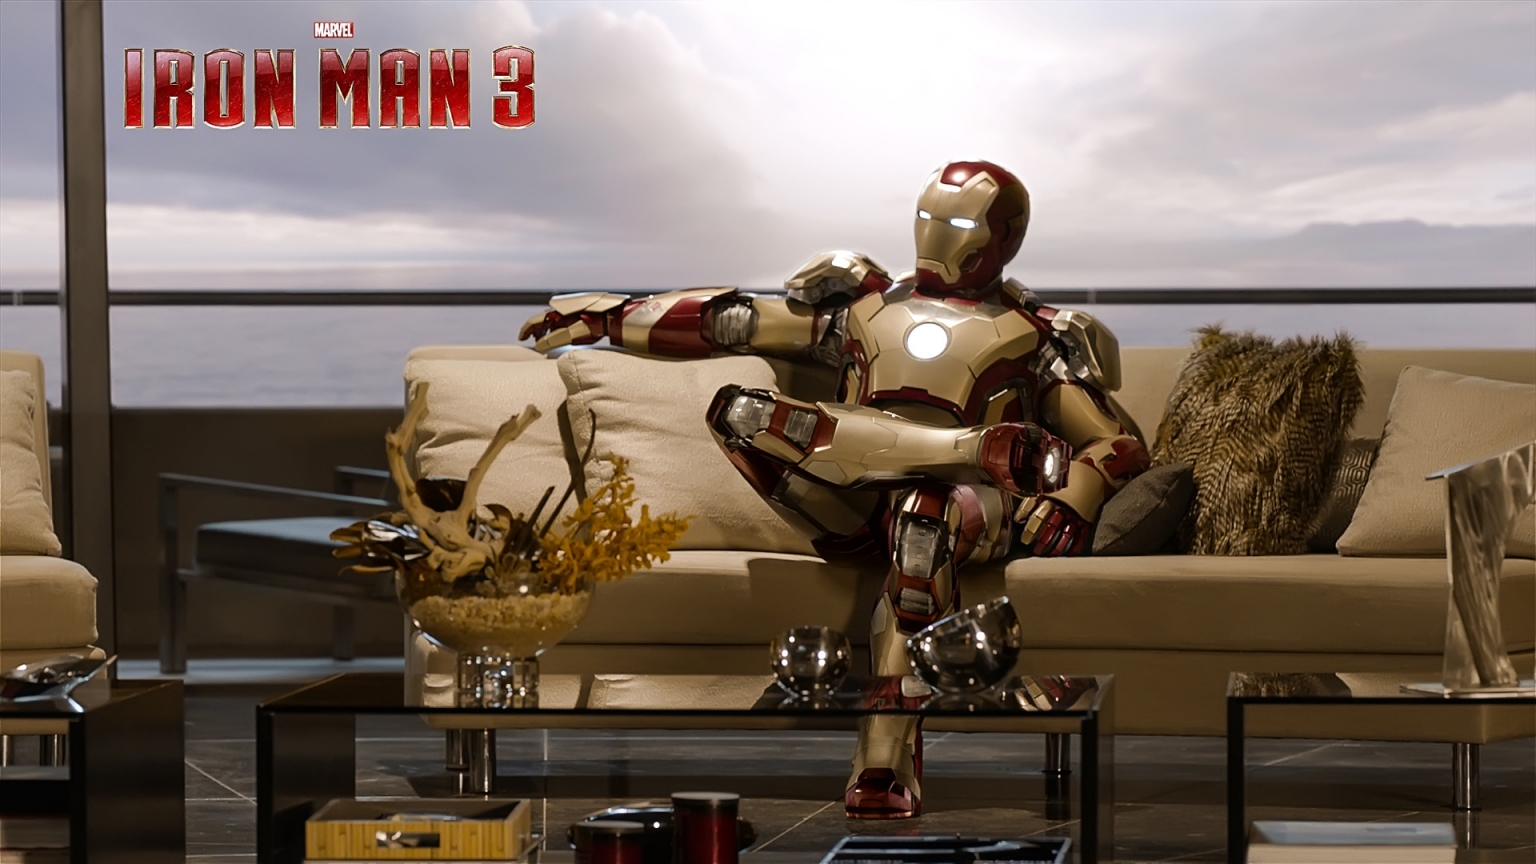 Cool Iron Man 3 for 1536 x 864 HDTV resolution